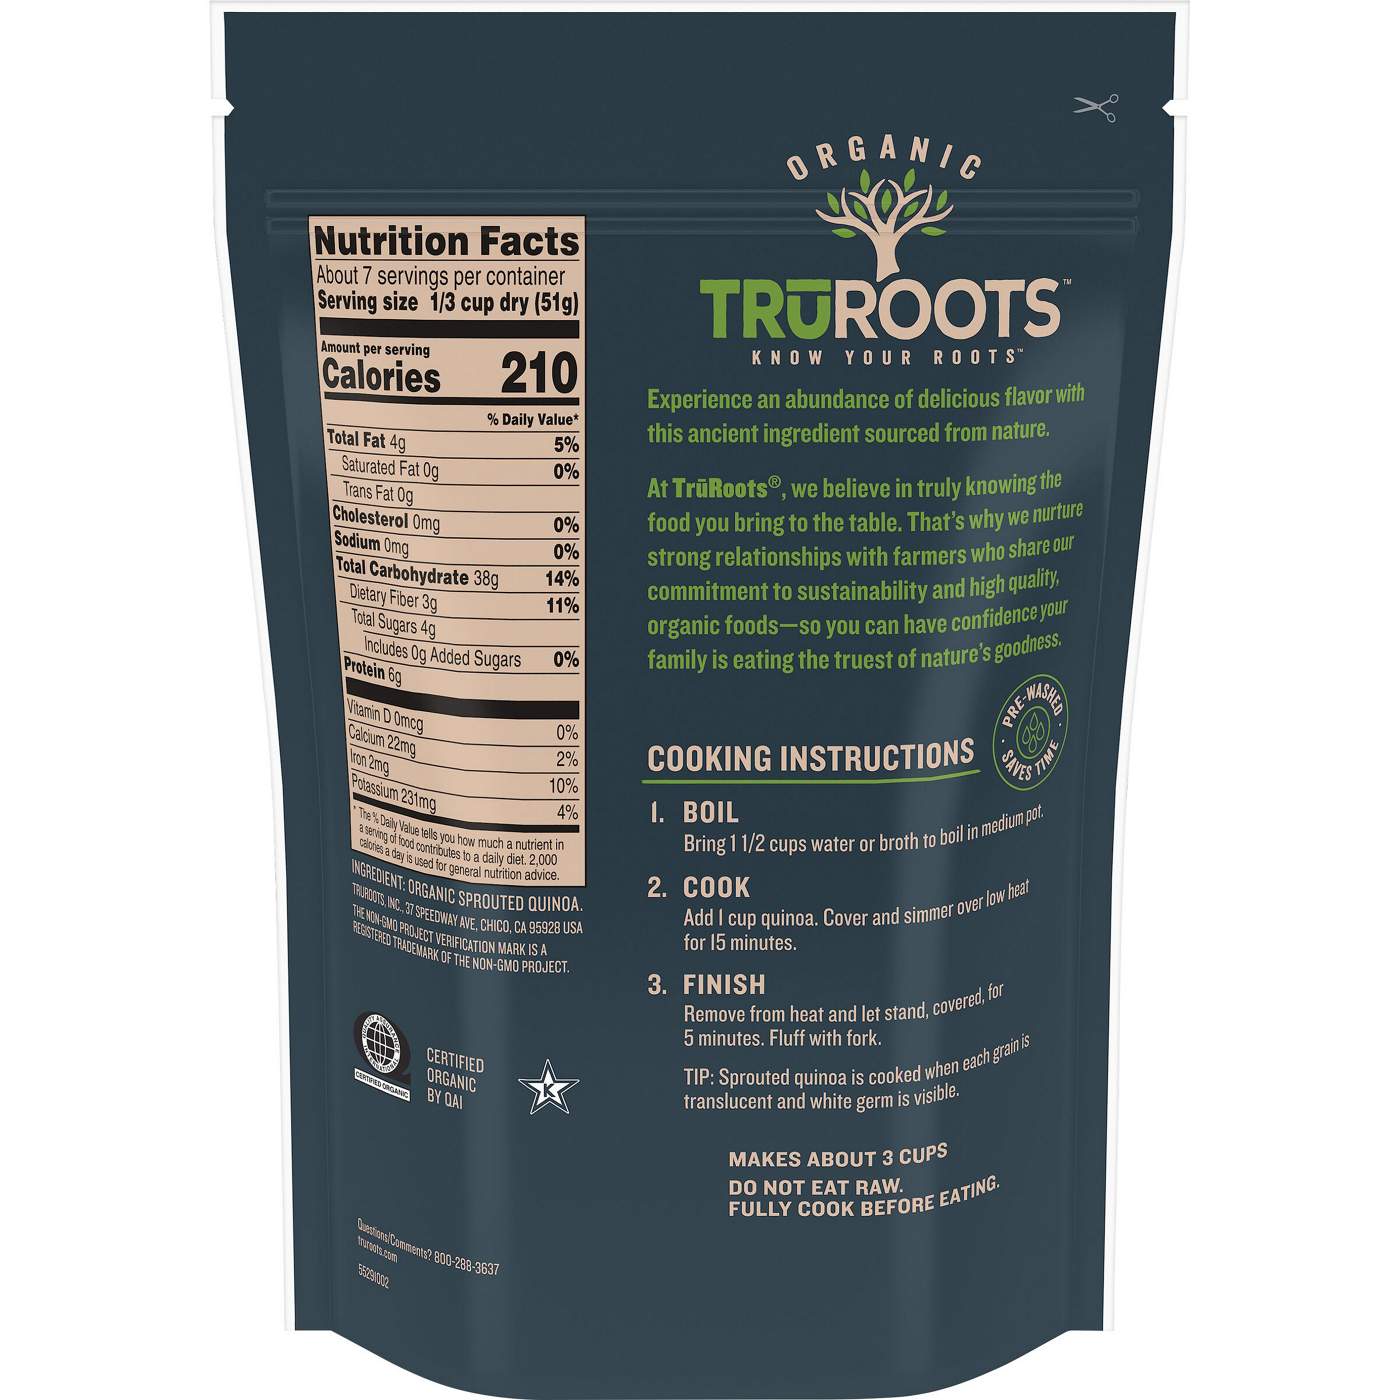 TruRoots Organic Whole Grain Sprouted Quinoa; image 3 of 3